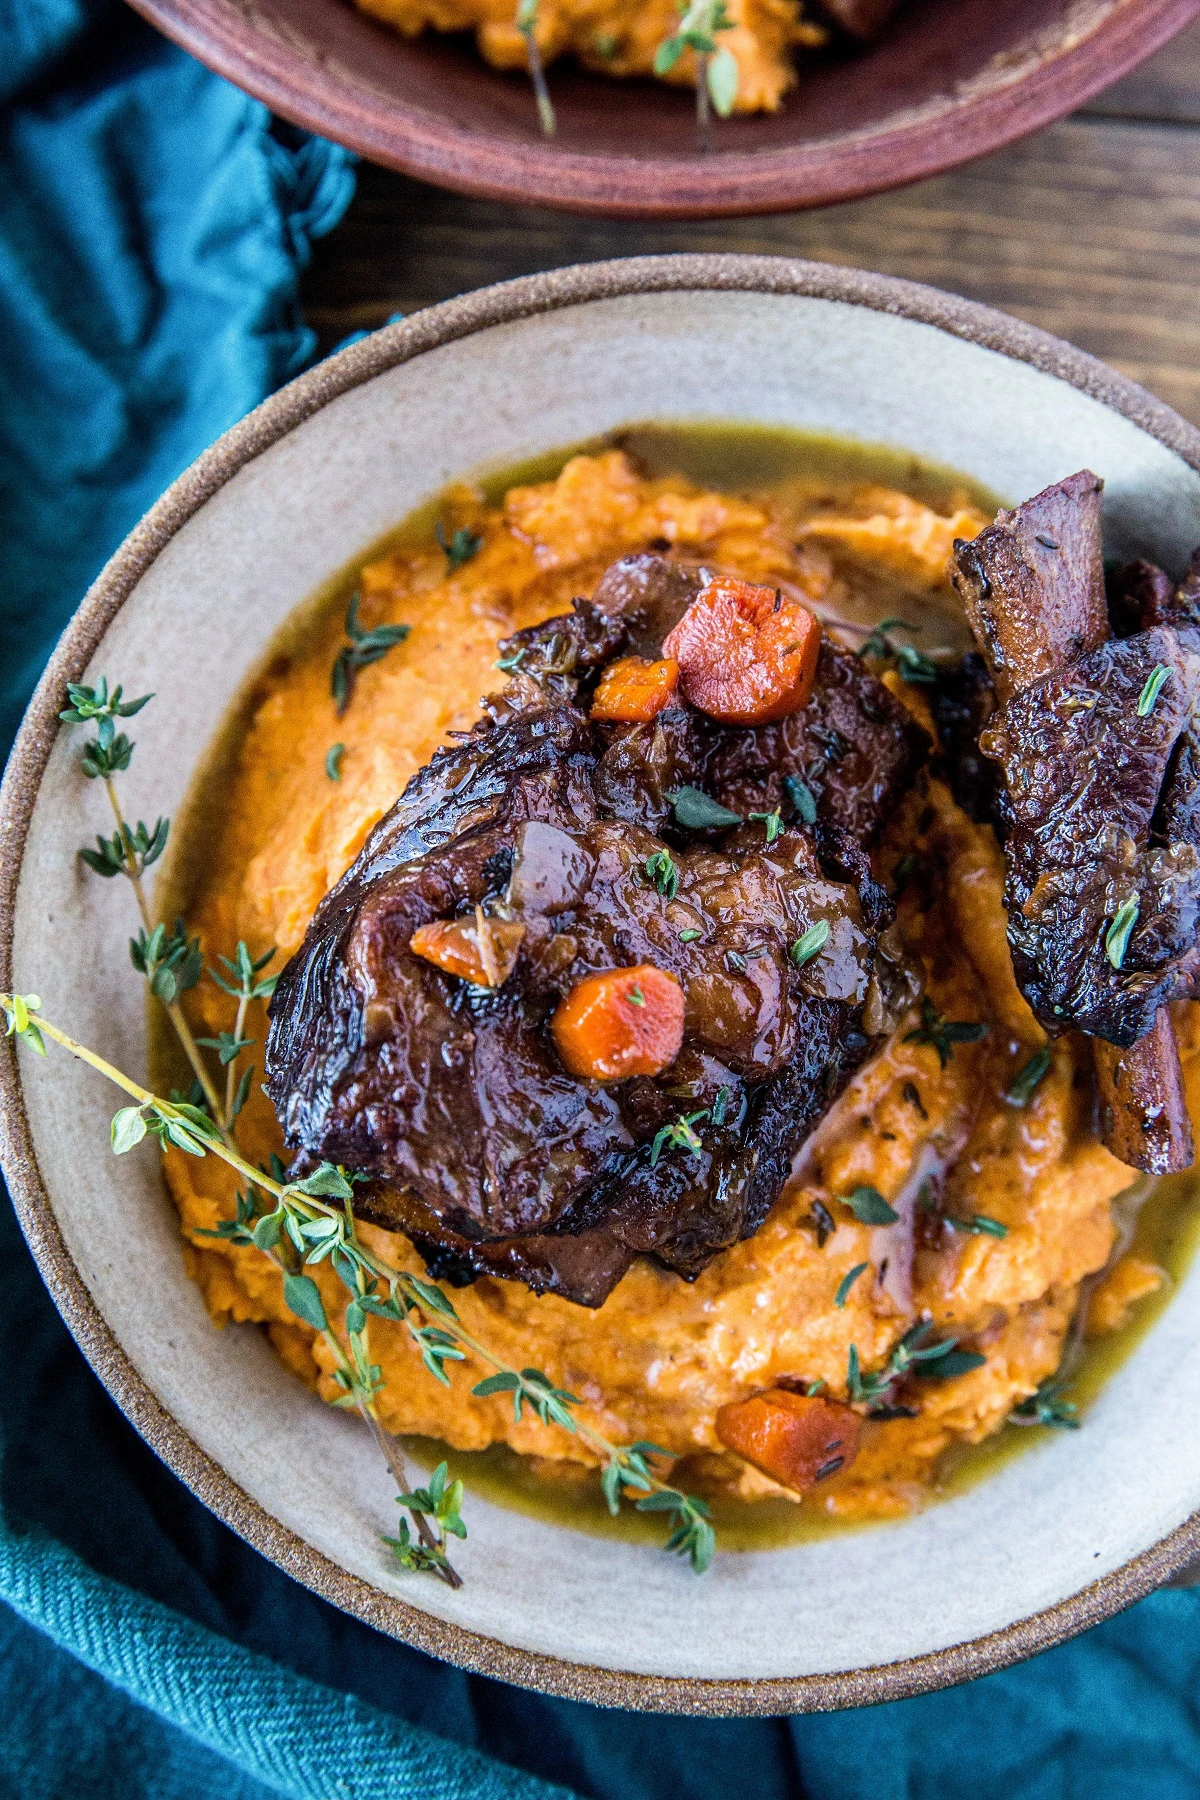 Instant Pot Short Ribs made paleo-friendly with tart cherry juice. Serve them atop mashed sweet potatoes for a delicious complete meal. | TheRoastedRoot.com #grainfree #glutenfree #healthyrecipe